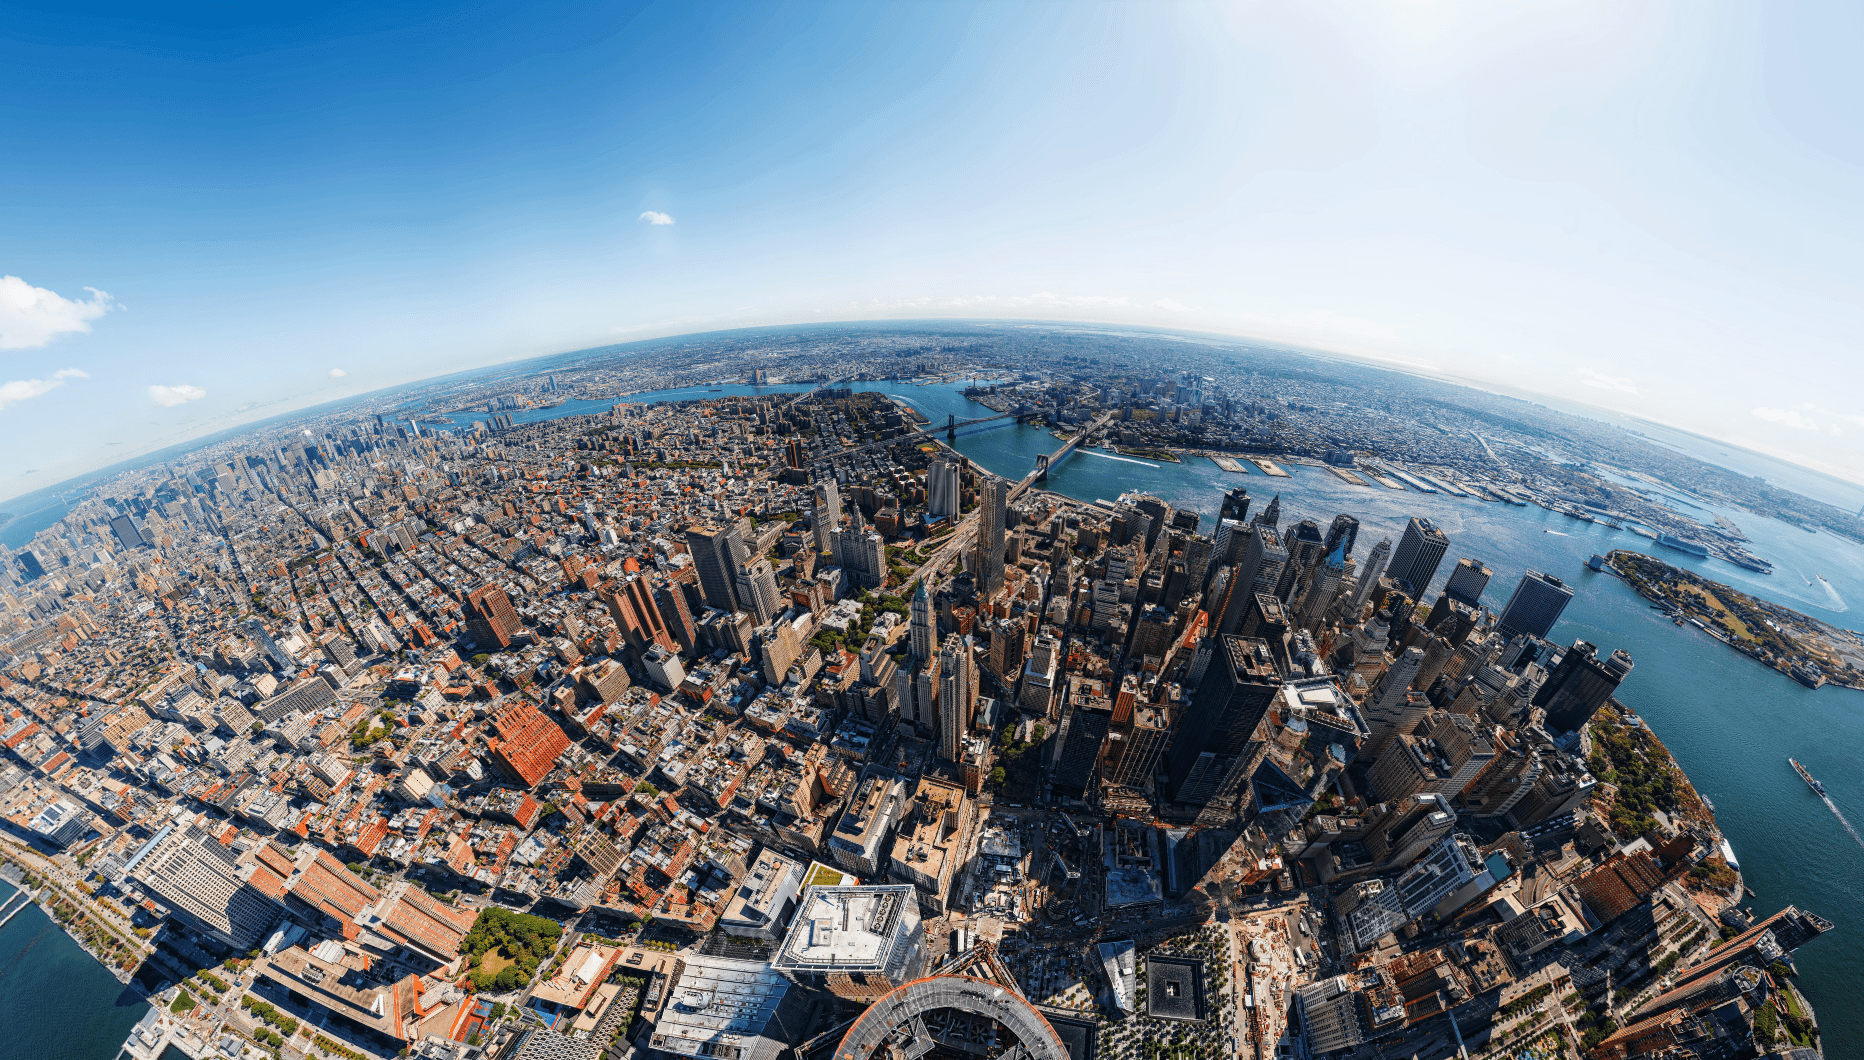 How To Take A Panorama From The Tallest Building In The US